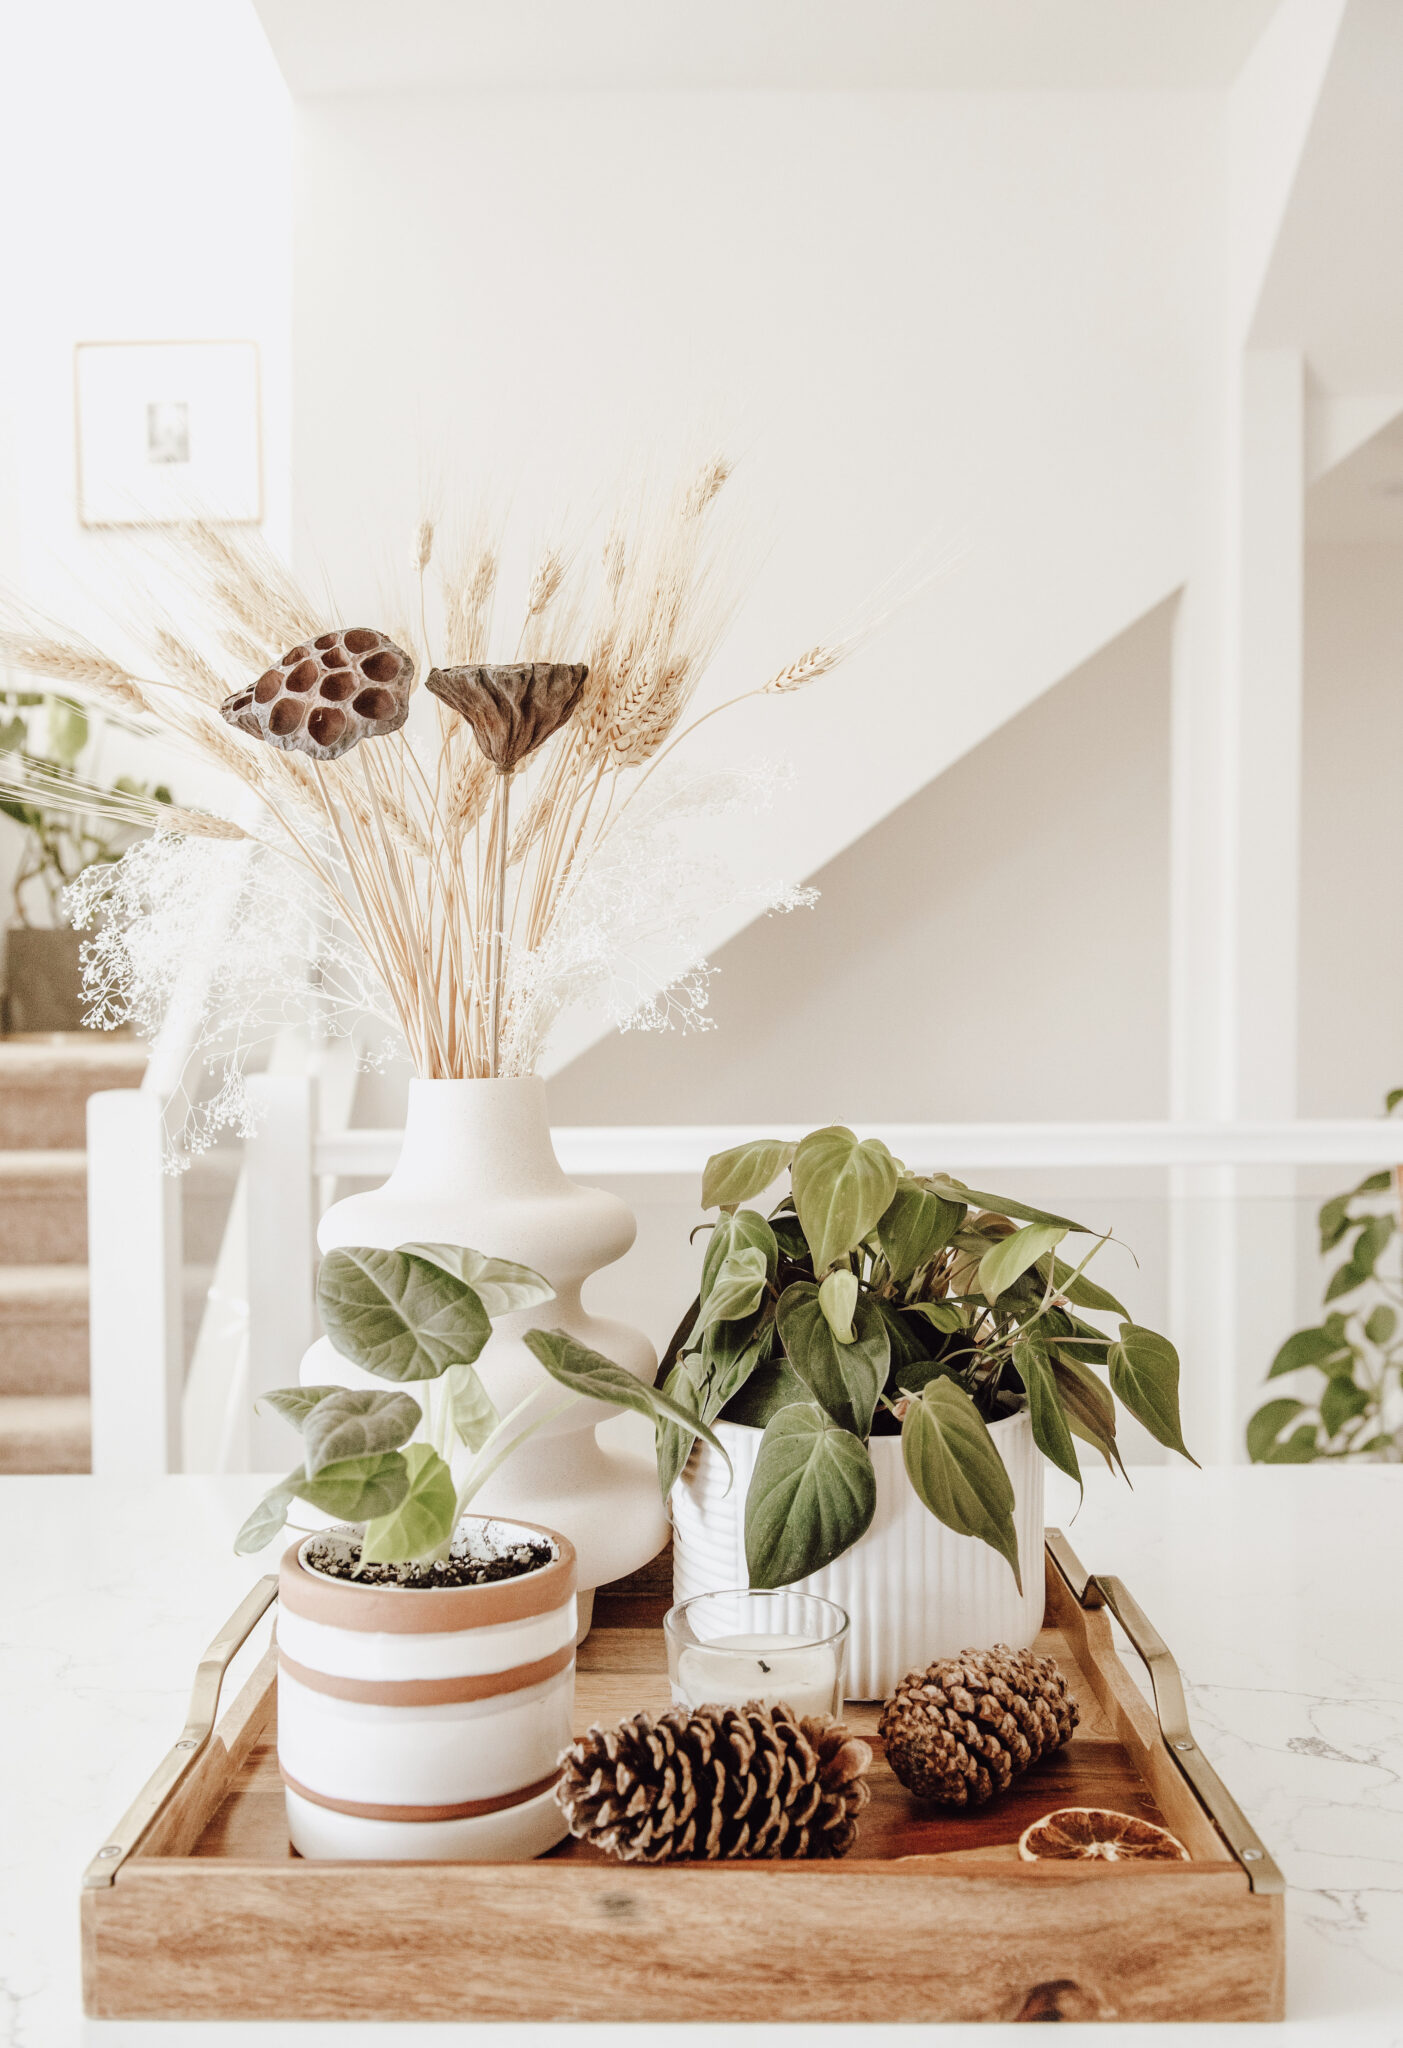 A living room decorated in neutrals with greenery.  This article lists a few tweaks that will make your home easier to maintain.